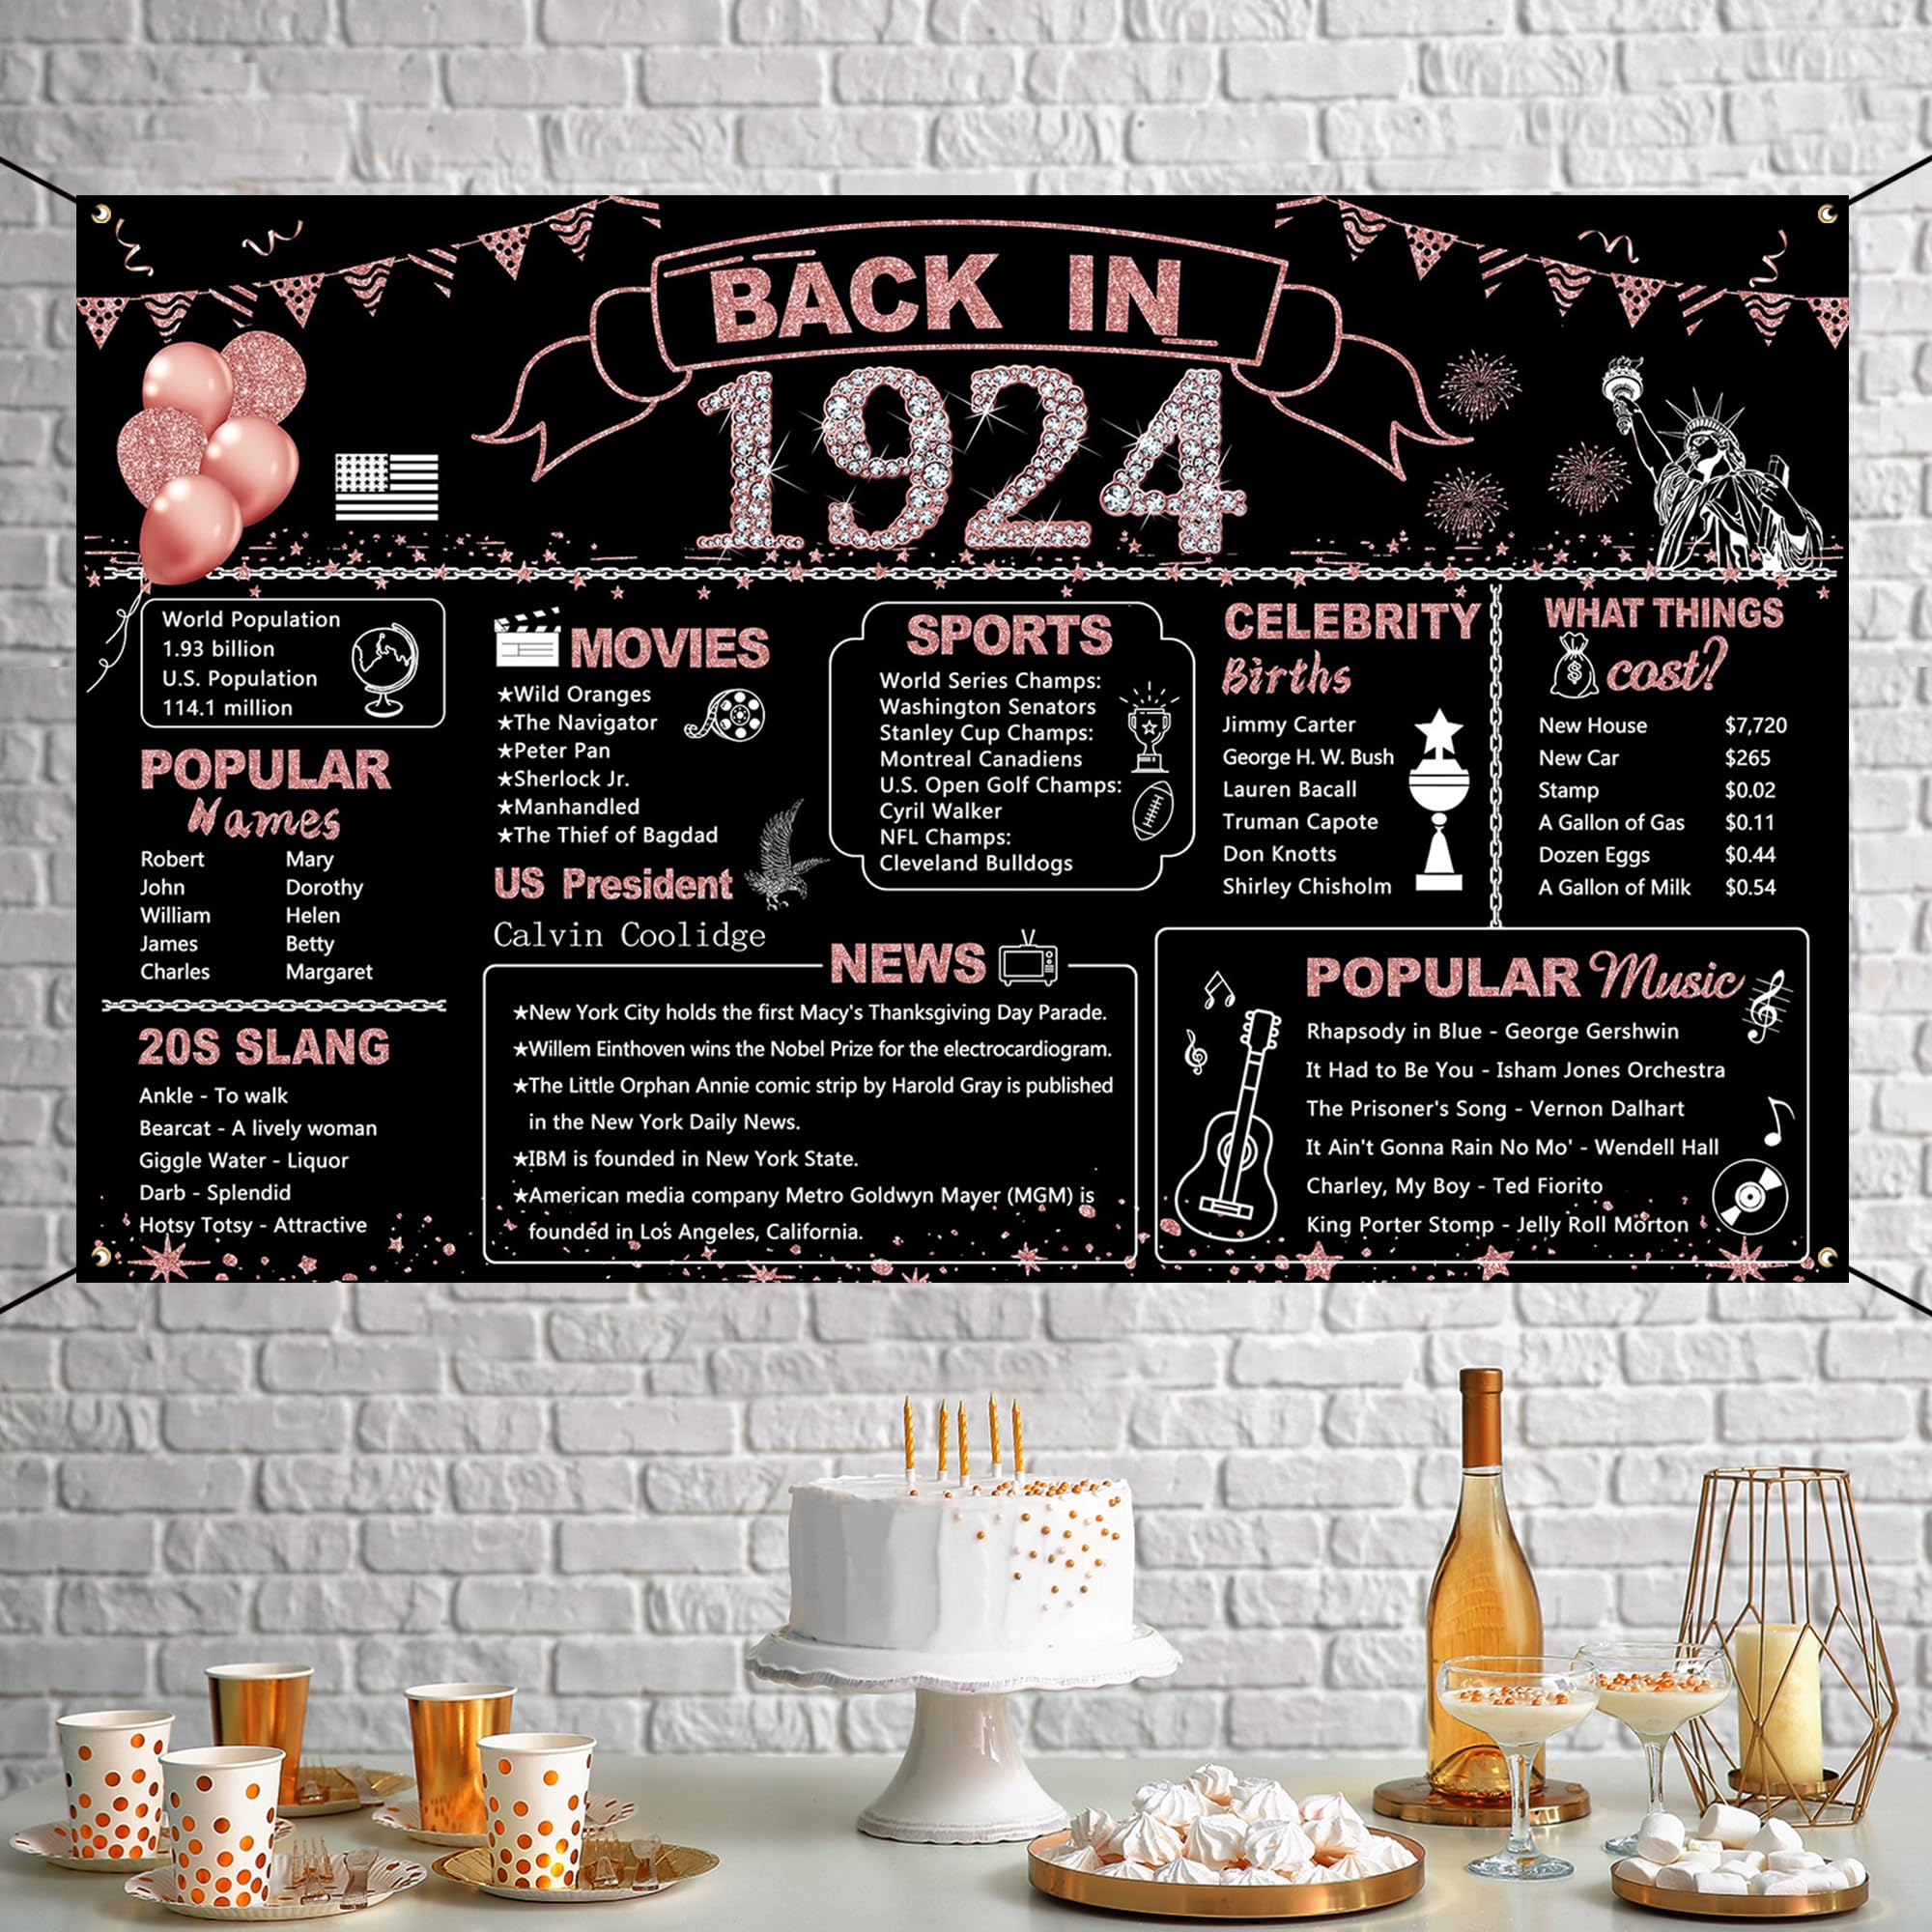 DARUNAXY 51st Birthday Rose Gold Party Decoration, Back in 1973 Banner for Women 51 Years Old Birthday Photography Background Vintage 1973 Poster Backdrop for Girls 51st Class Reunion Party Supplies